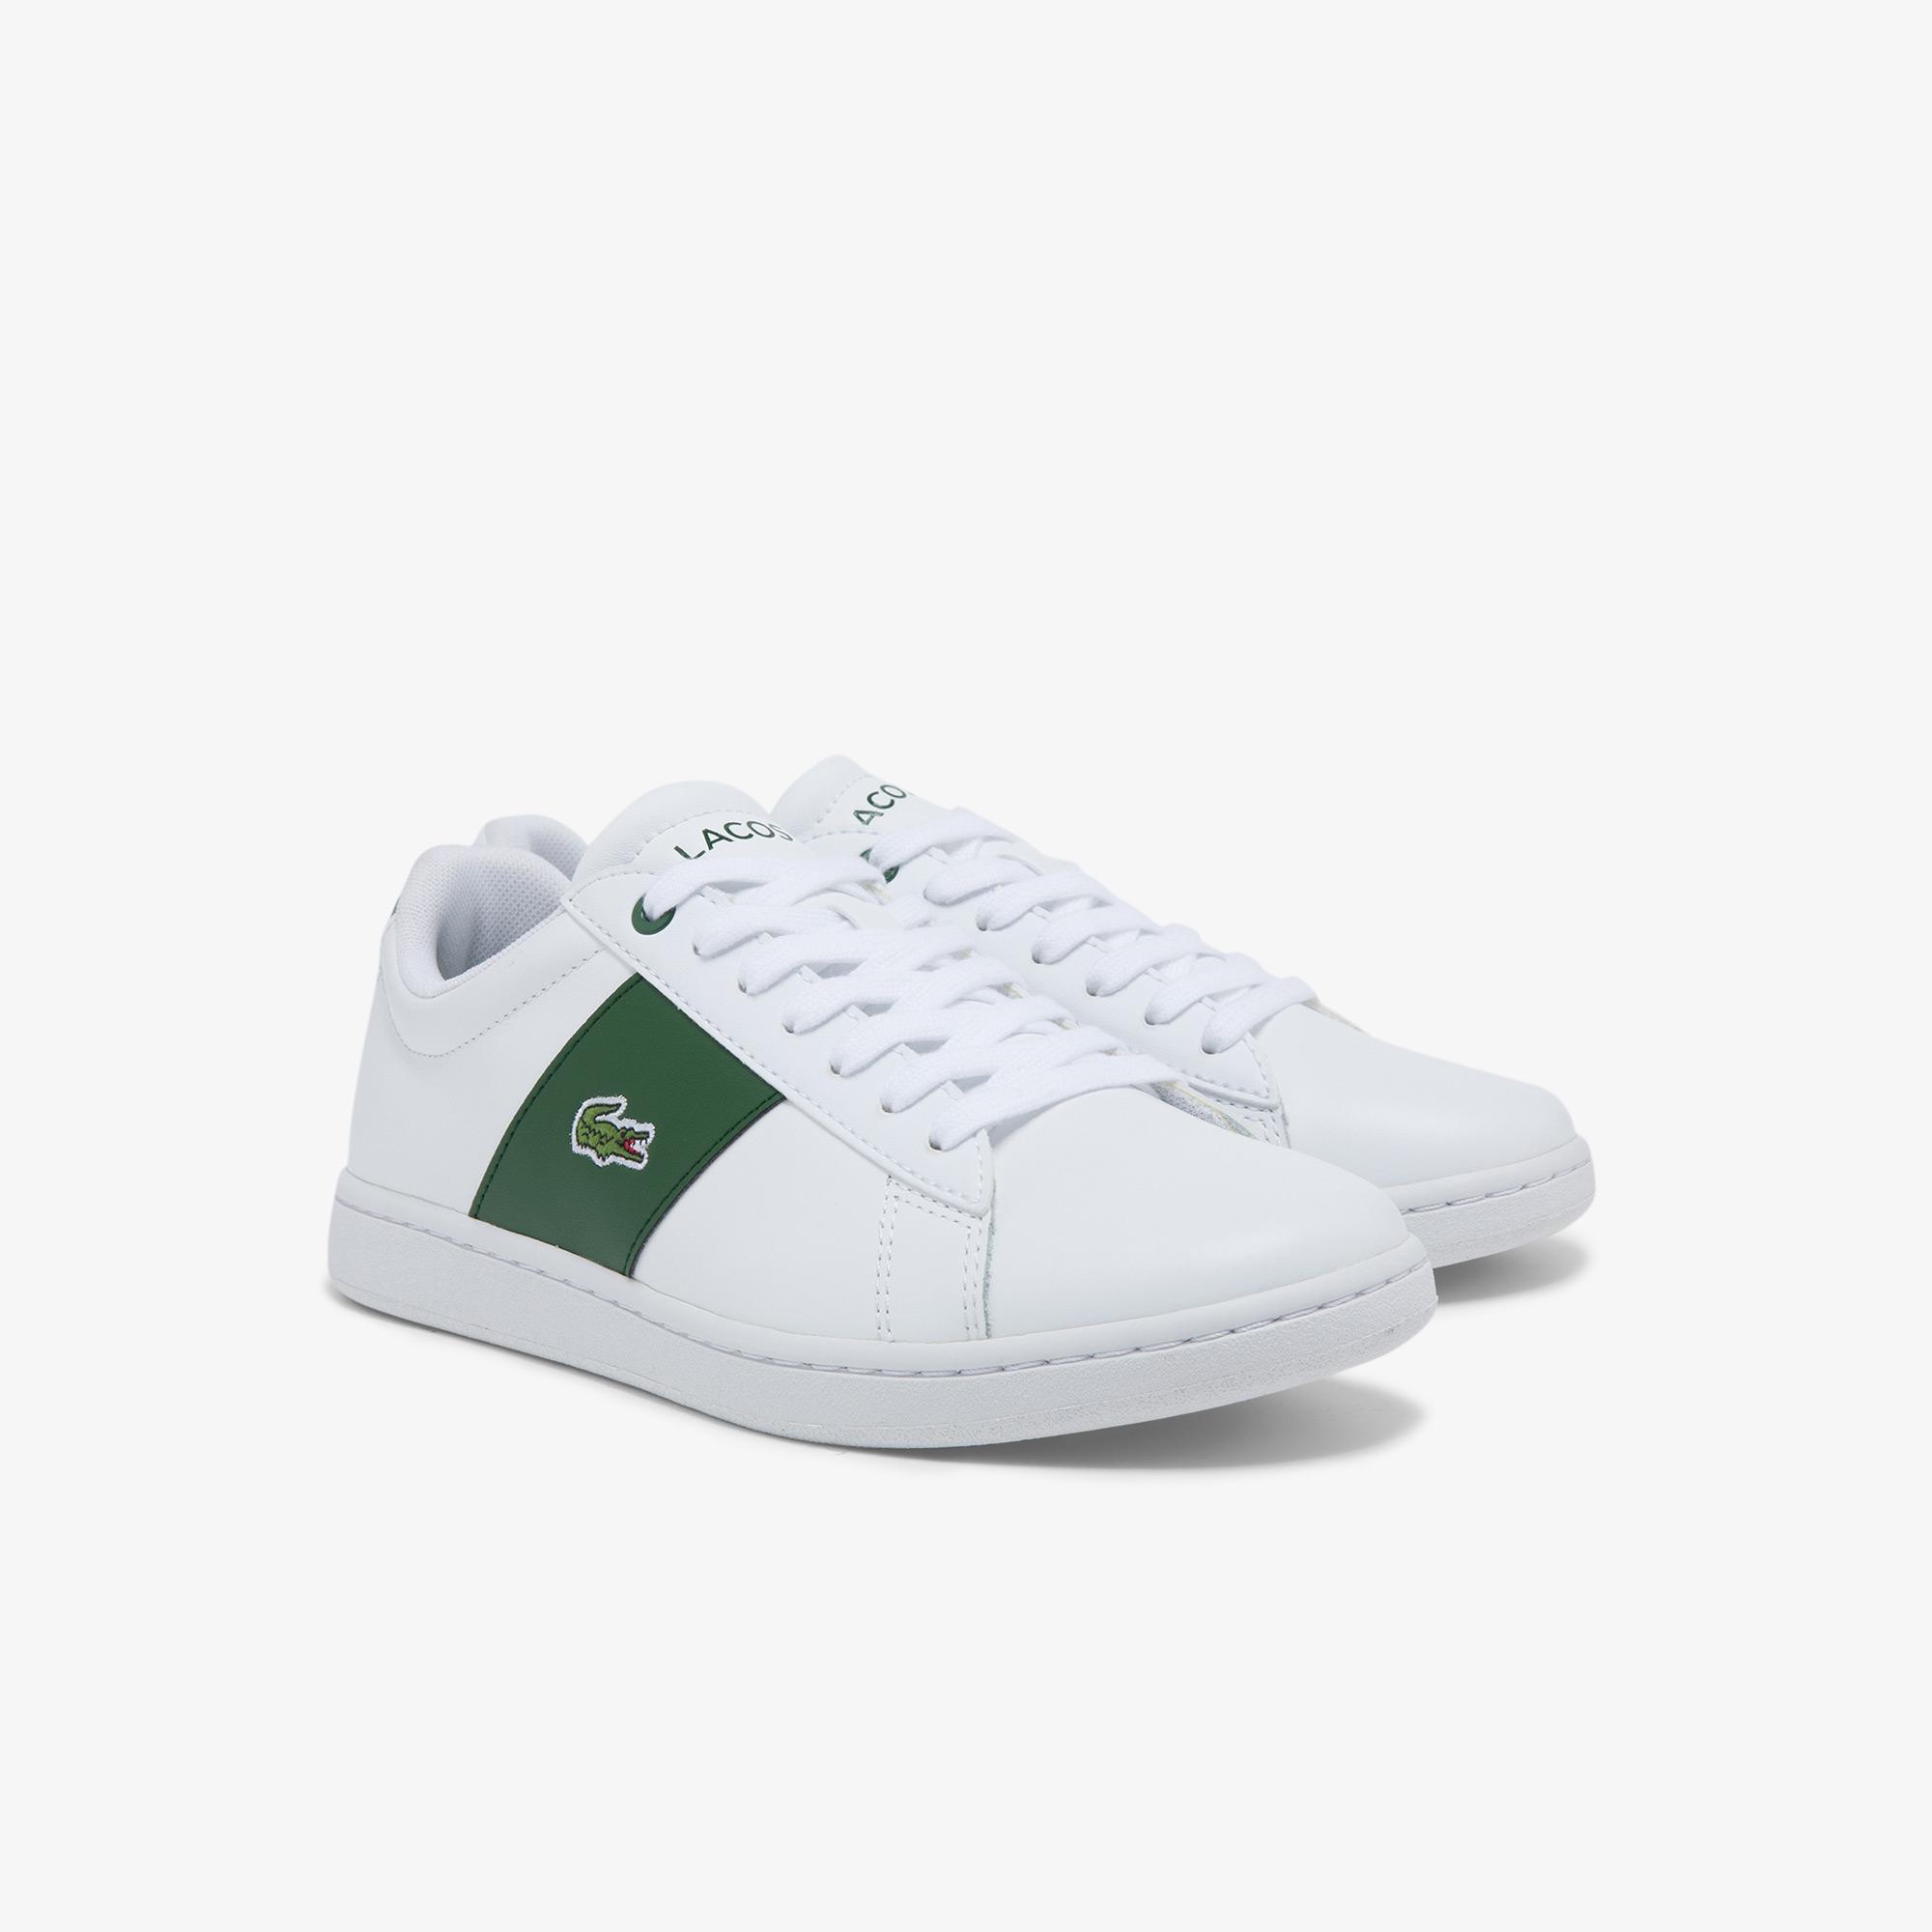 Lacoste Women's Carnaby Evo Leather Contrast Quarter Sneakers